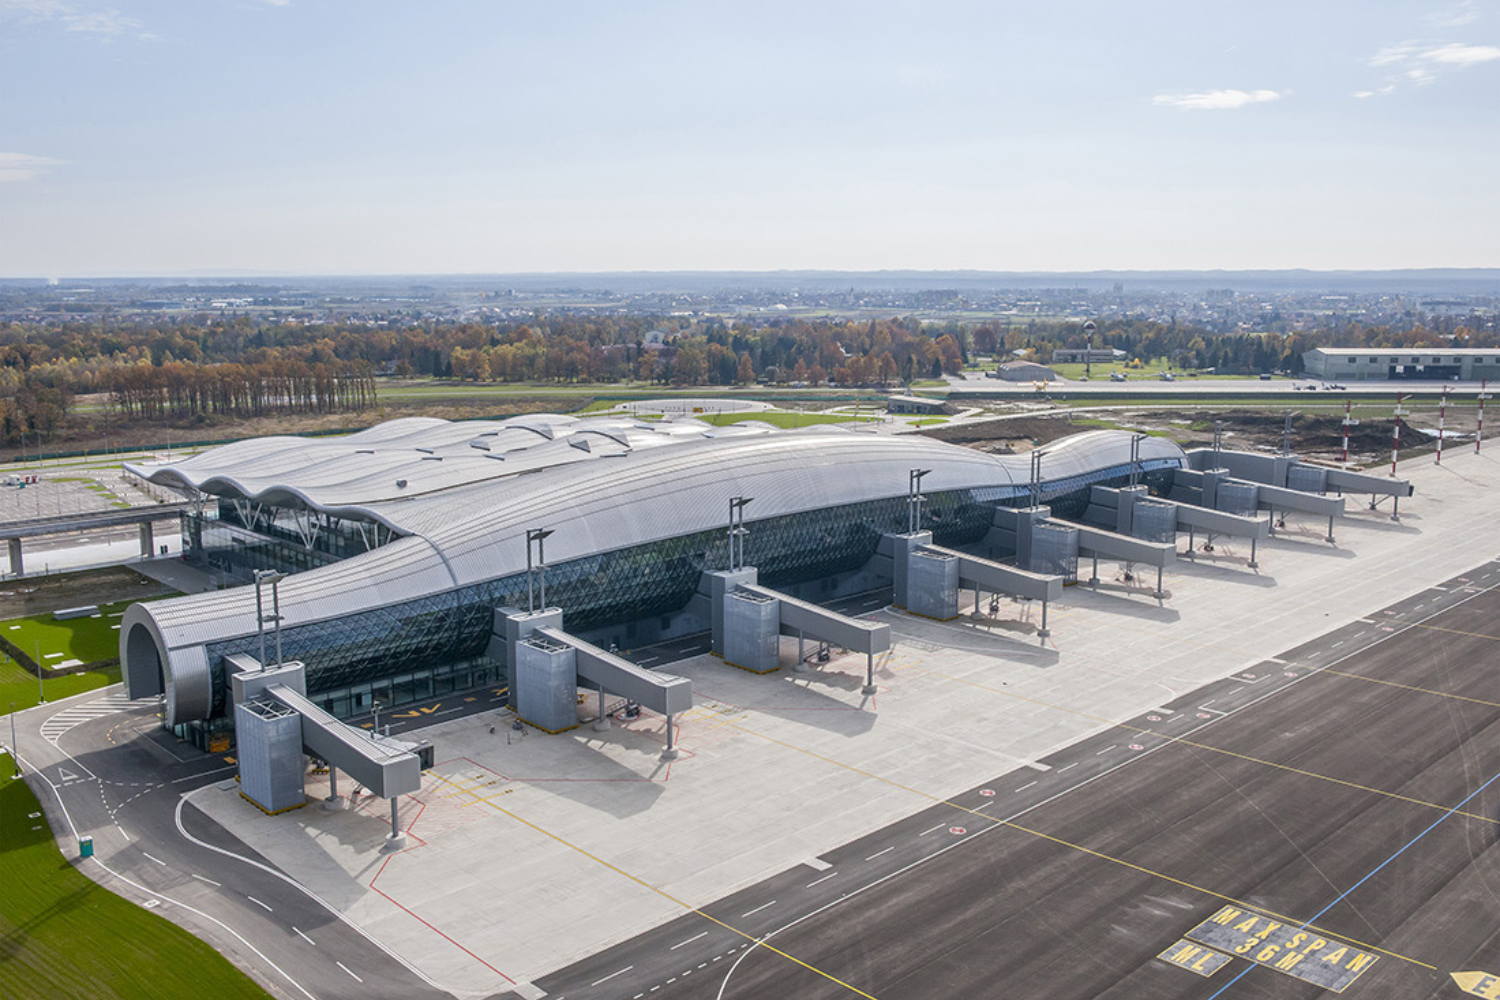 Zagreb Airport and EMMA Systems collaborate to implement an Airport Operations Management Platform/A-CDM.